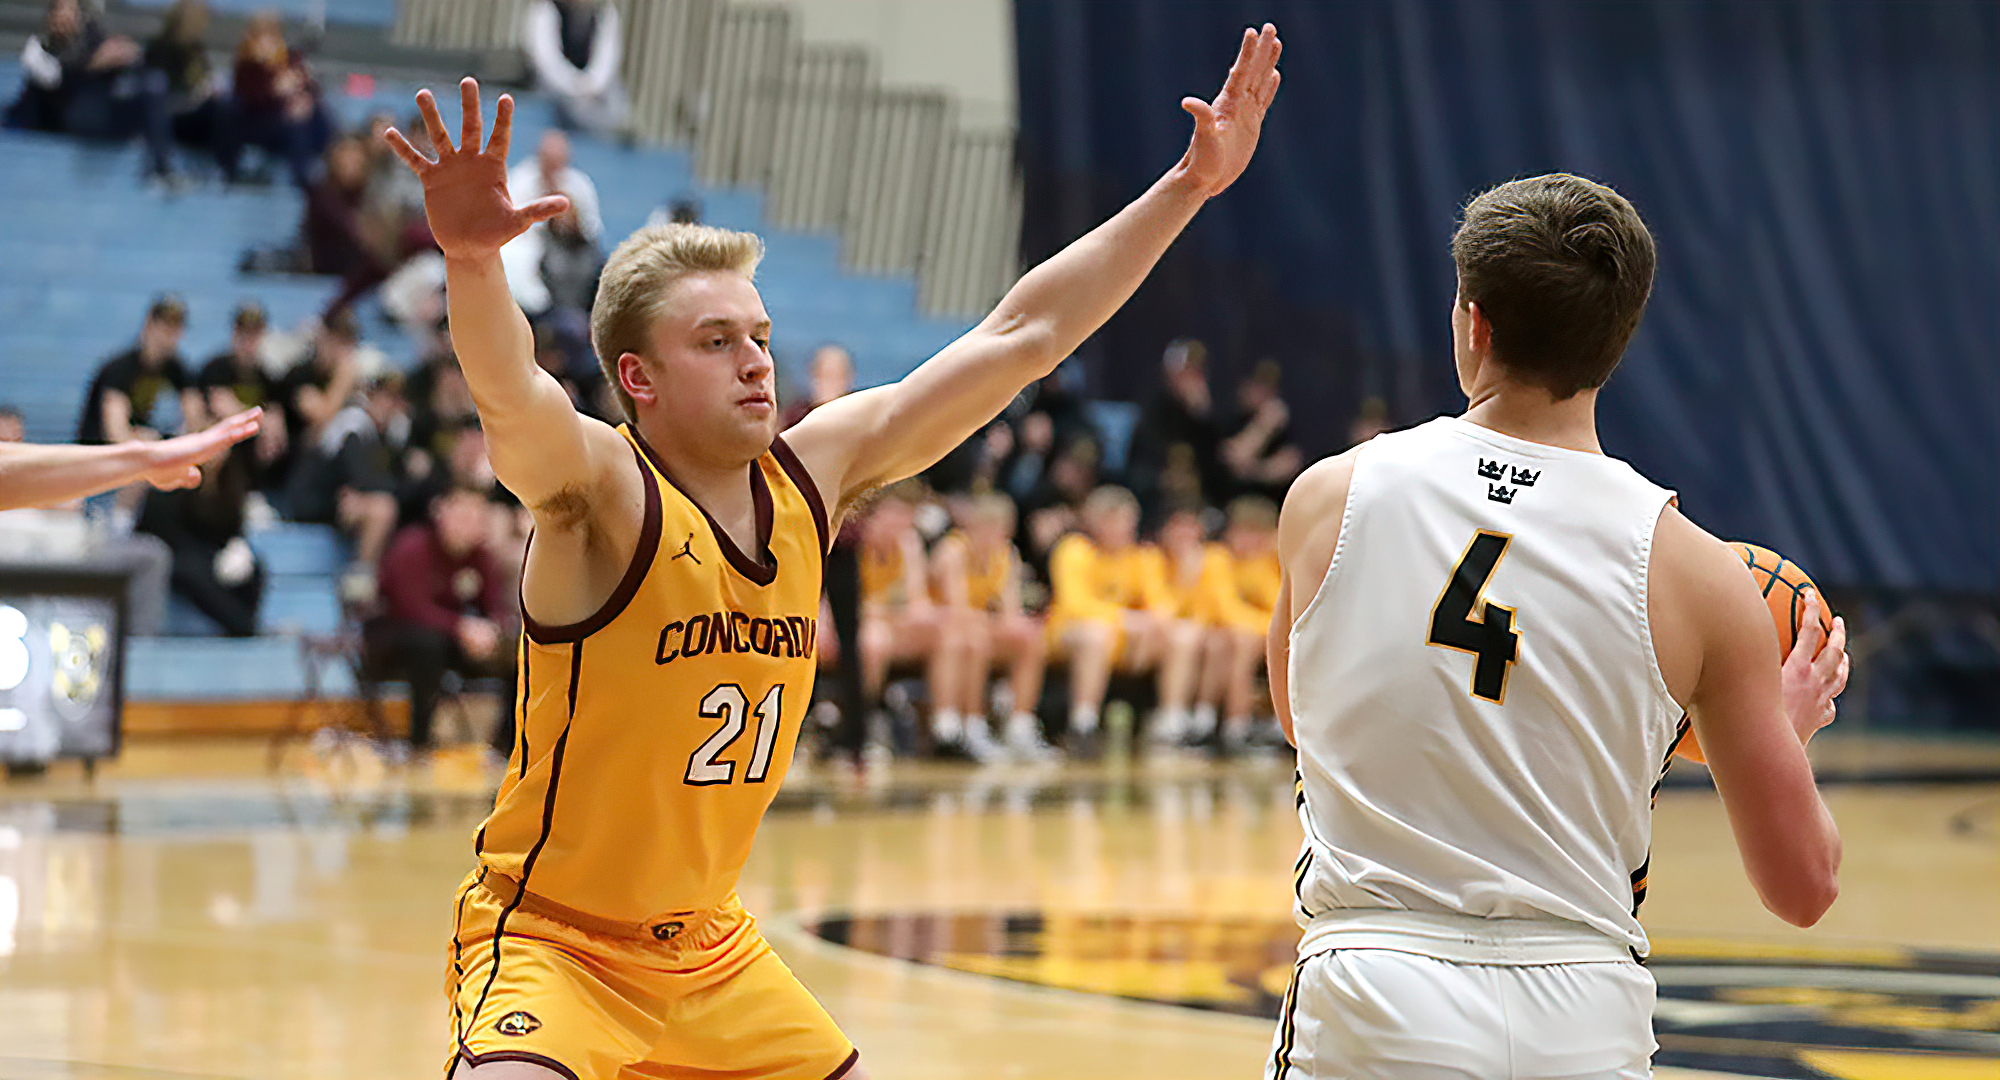 David Birkeland plays defense on the wing in the second half of the Cobbers' game at Gustavus. (Photo courtesy of Piper Otto, Gustavus SID)